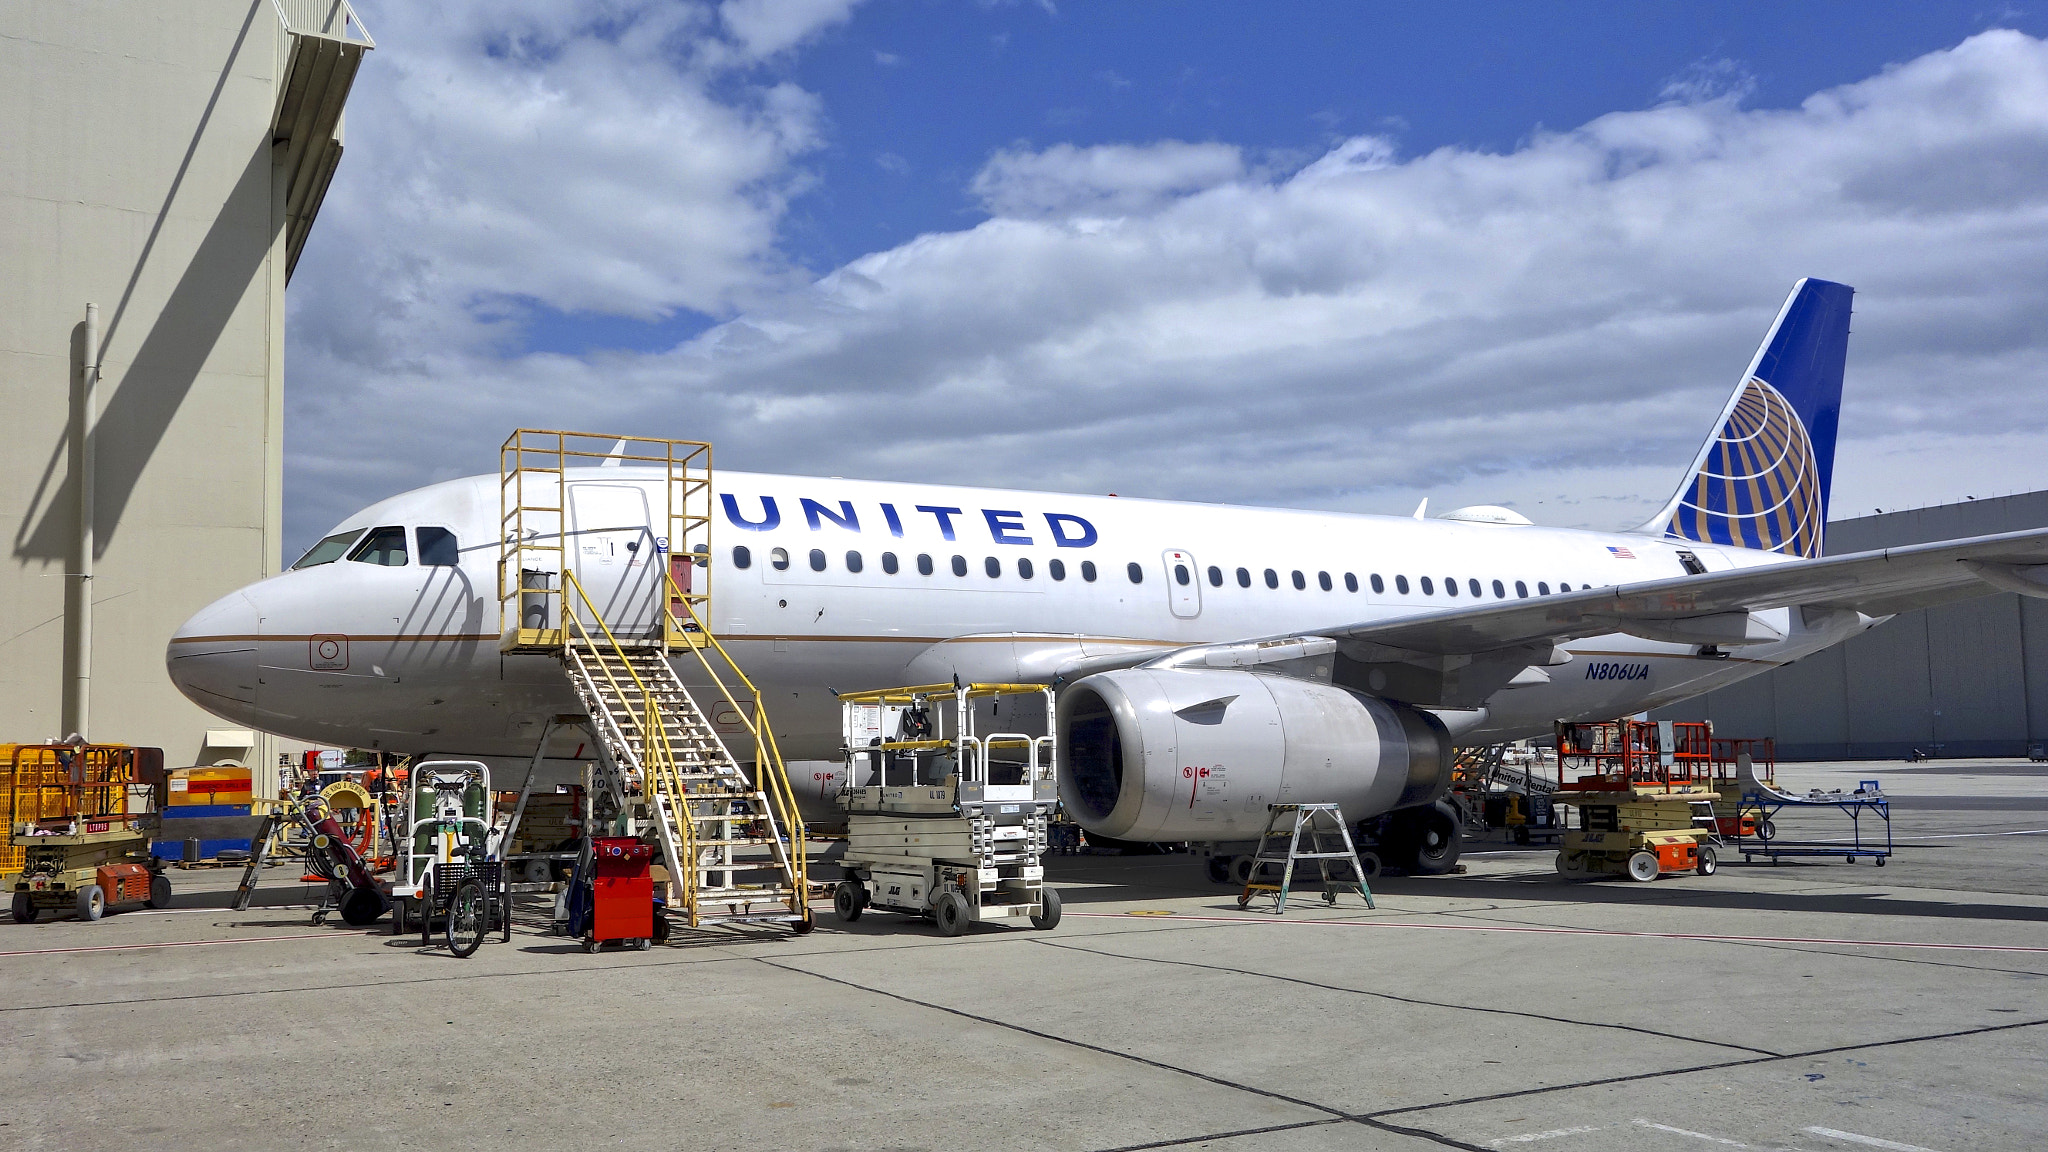 Sony Cyber-shot DSC-RX100 sample photo. United airlines airbus 319 n806ua at sfo. 2017. photography